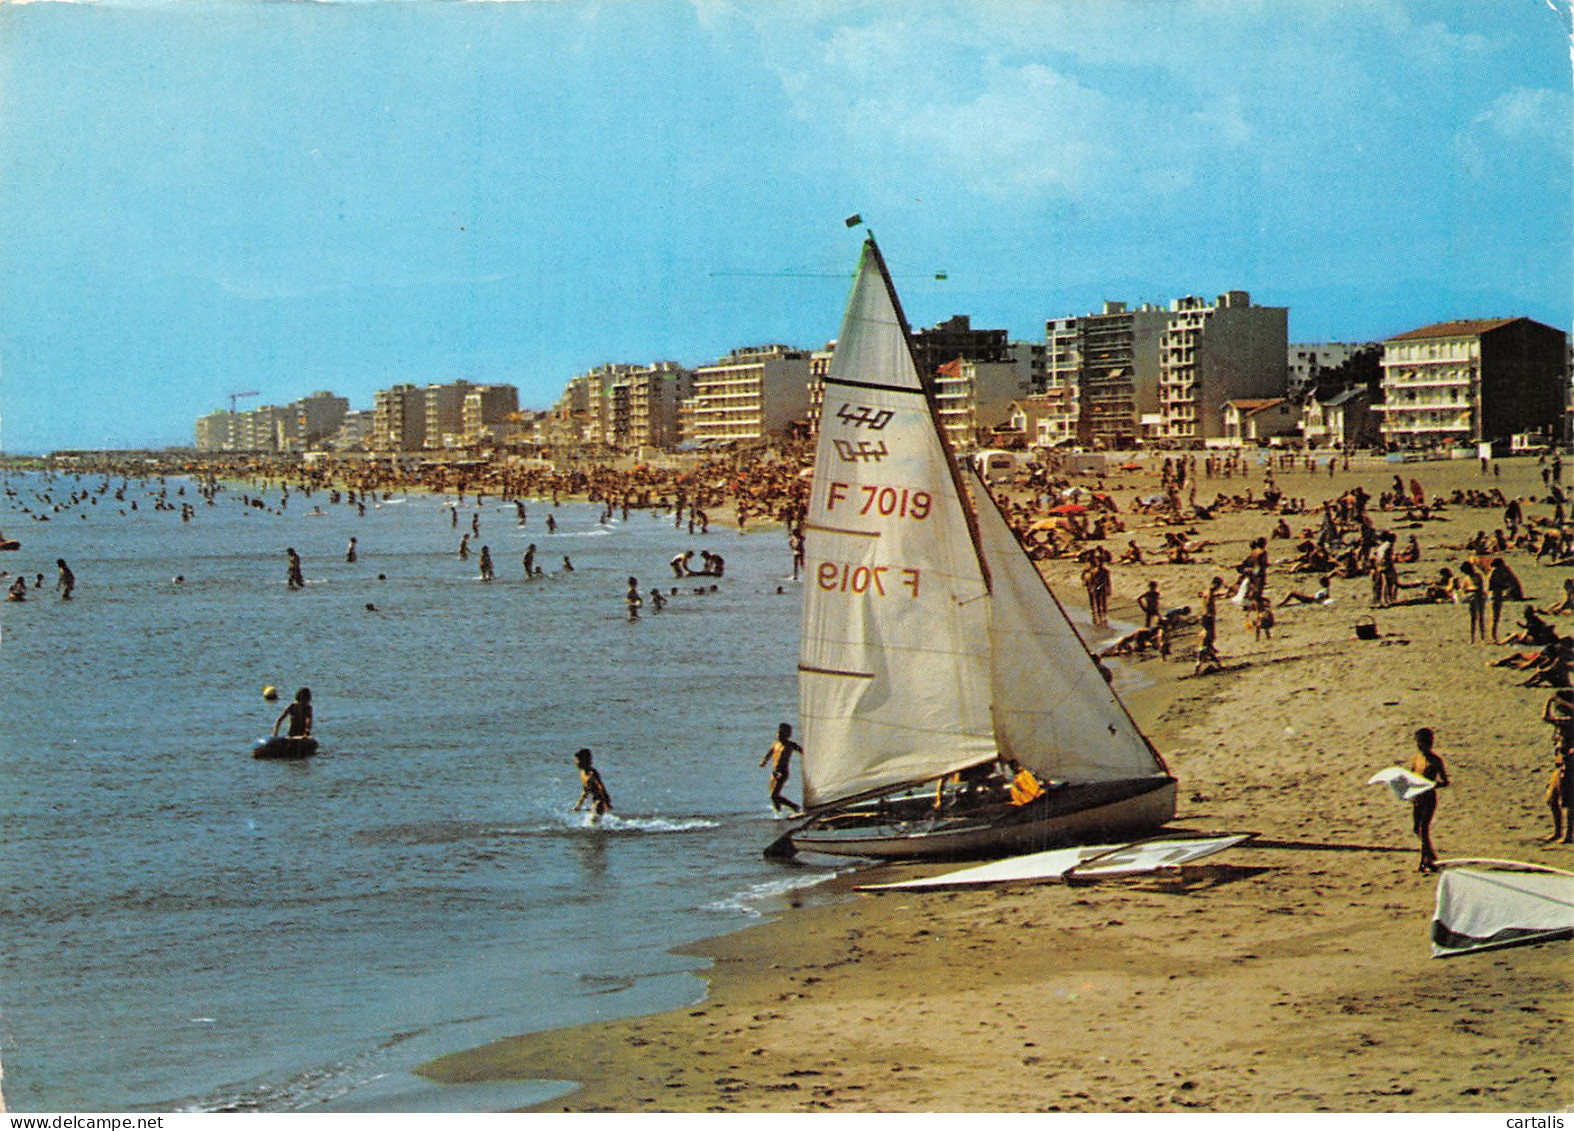 66-CANET PLAGE-N°4217-C/0155 - Canet Plage